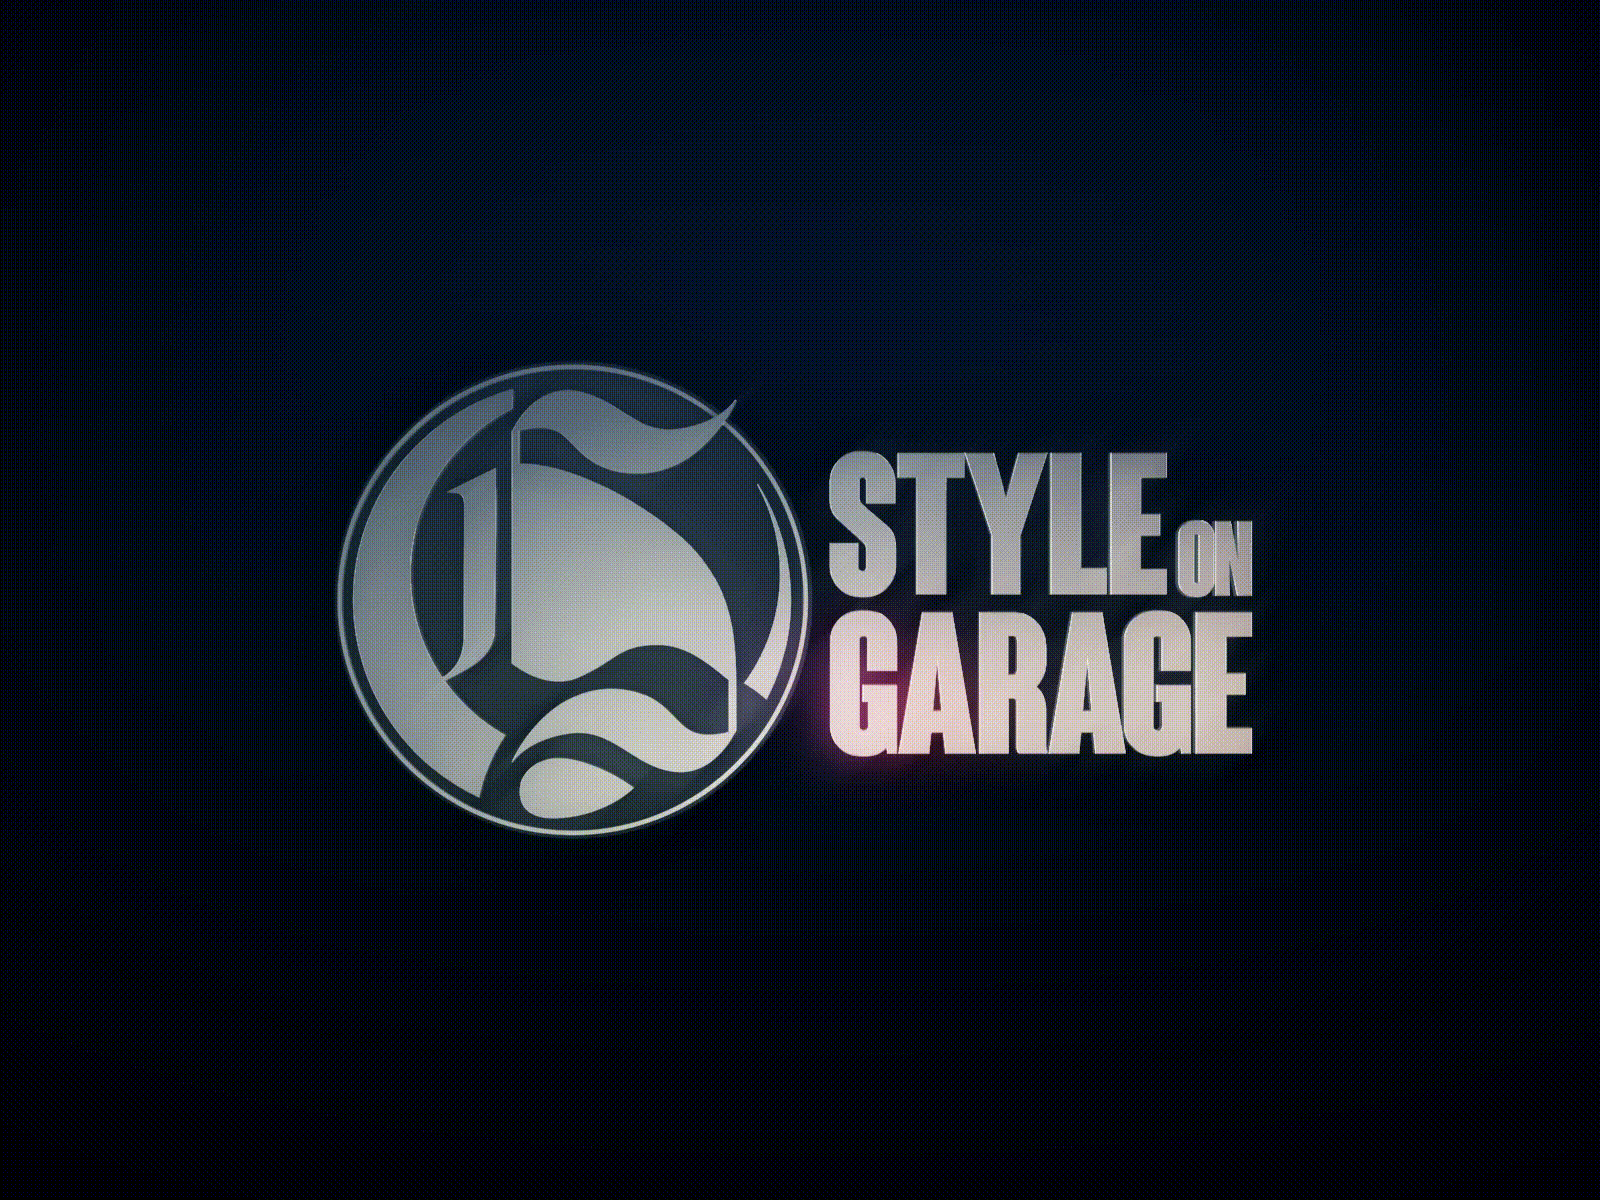 Style on Garage - logo reveal 3d animation 3d logo design 3d logo reveal 3d logo reveal after effects animation logo animation logo design logo reveal motion graphics